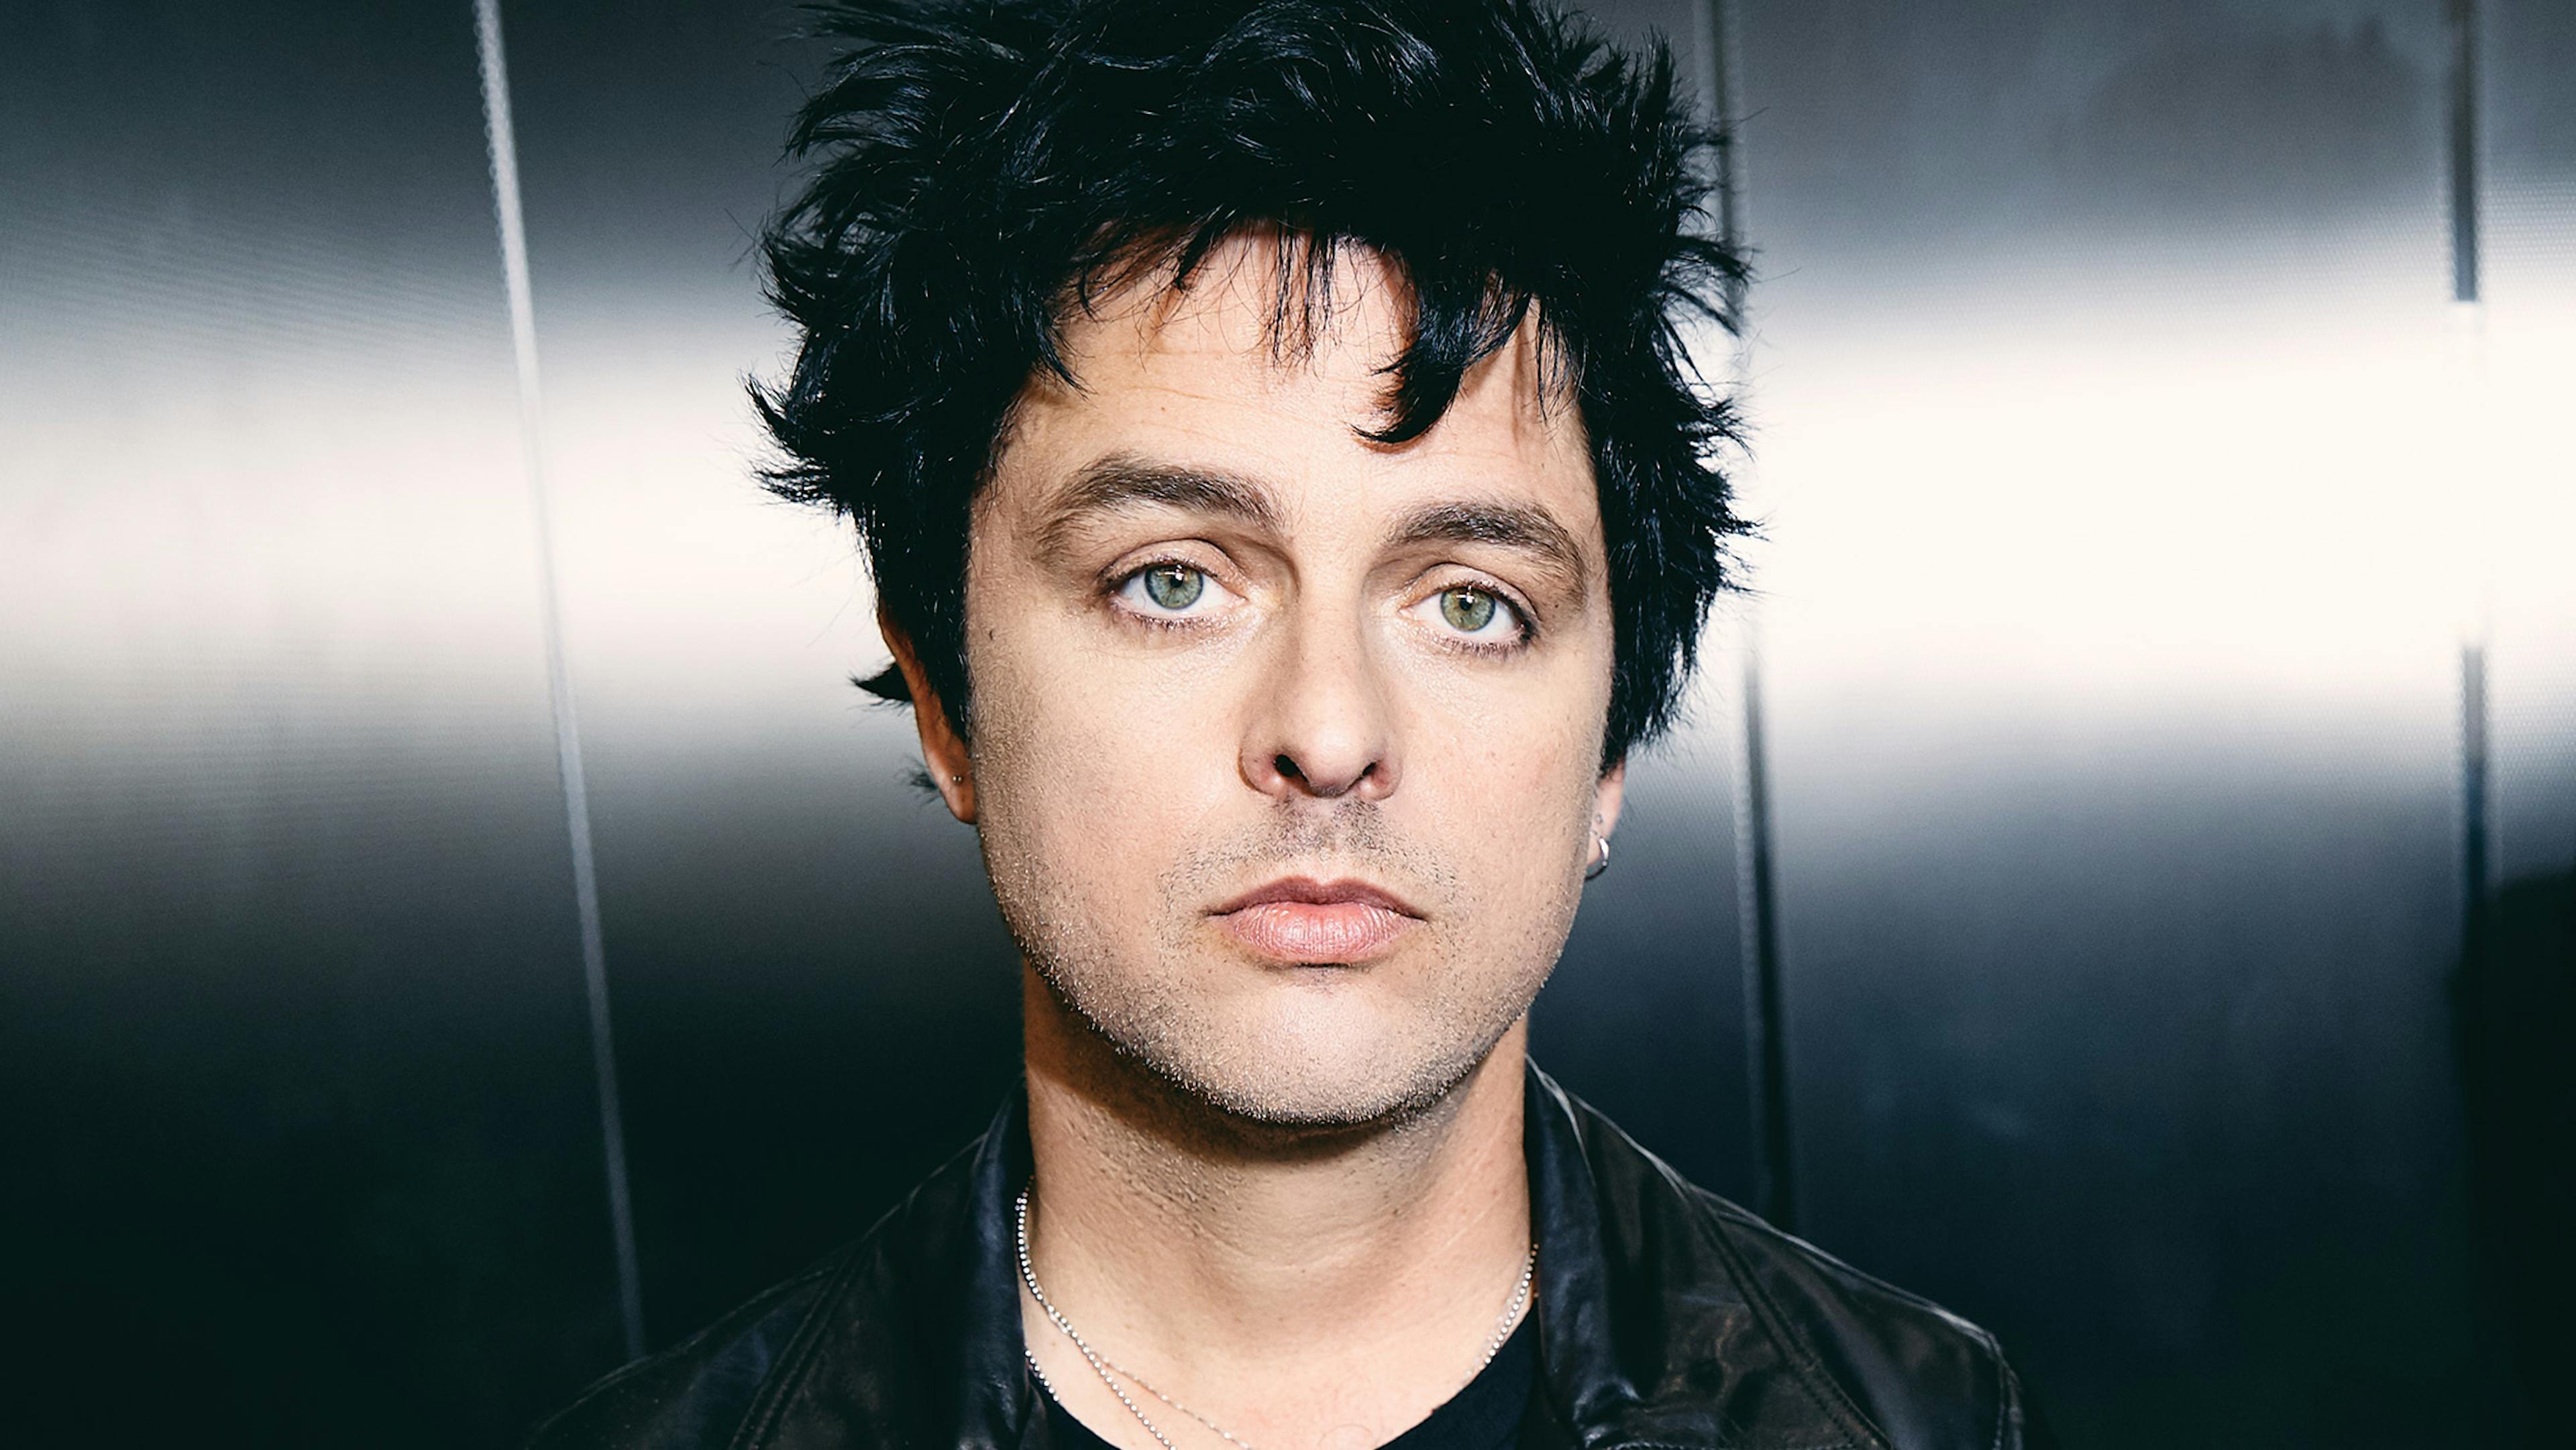 Billie Joe Armstrong Has Recorded A New Cover Song In His Bedroom